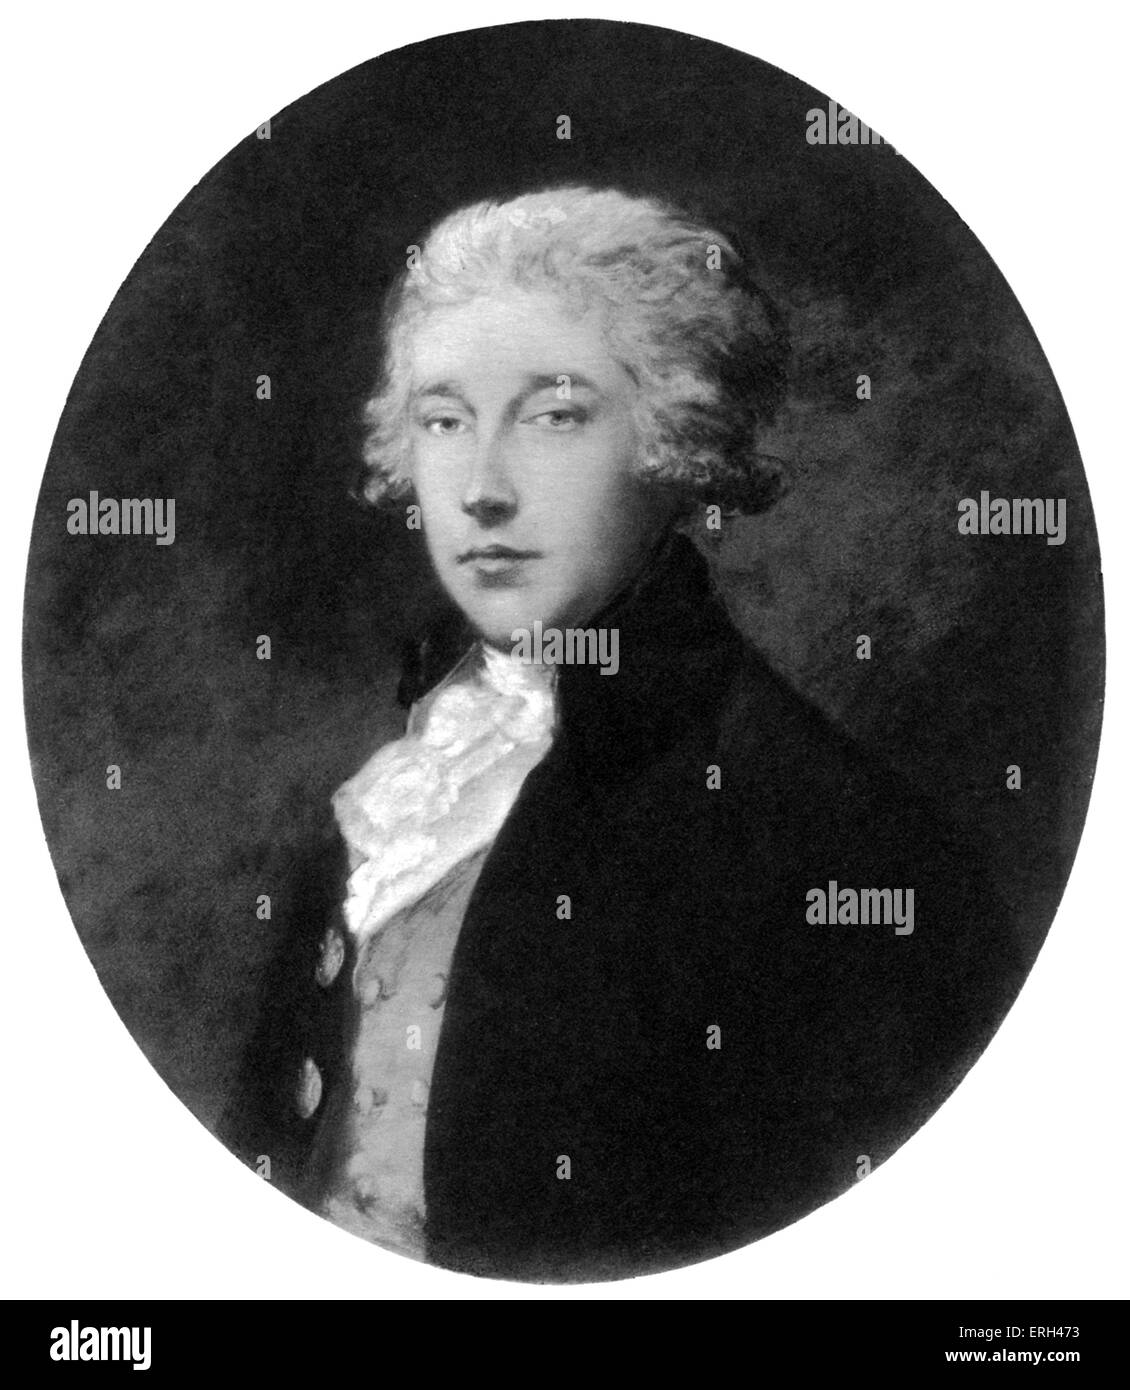 Richard Brinsley Sheridan, portrait of the Irish playwright and Whig politician, 30  October  1751 – 7 July  1816. After the Stock Photo